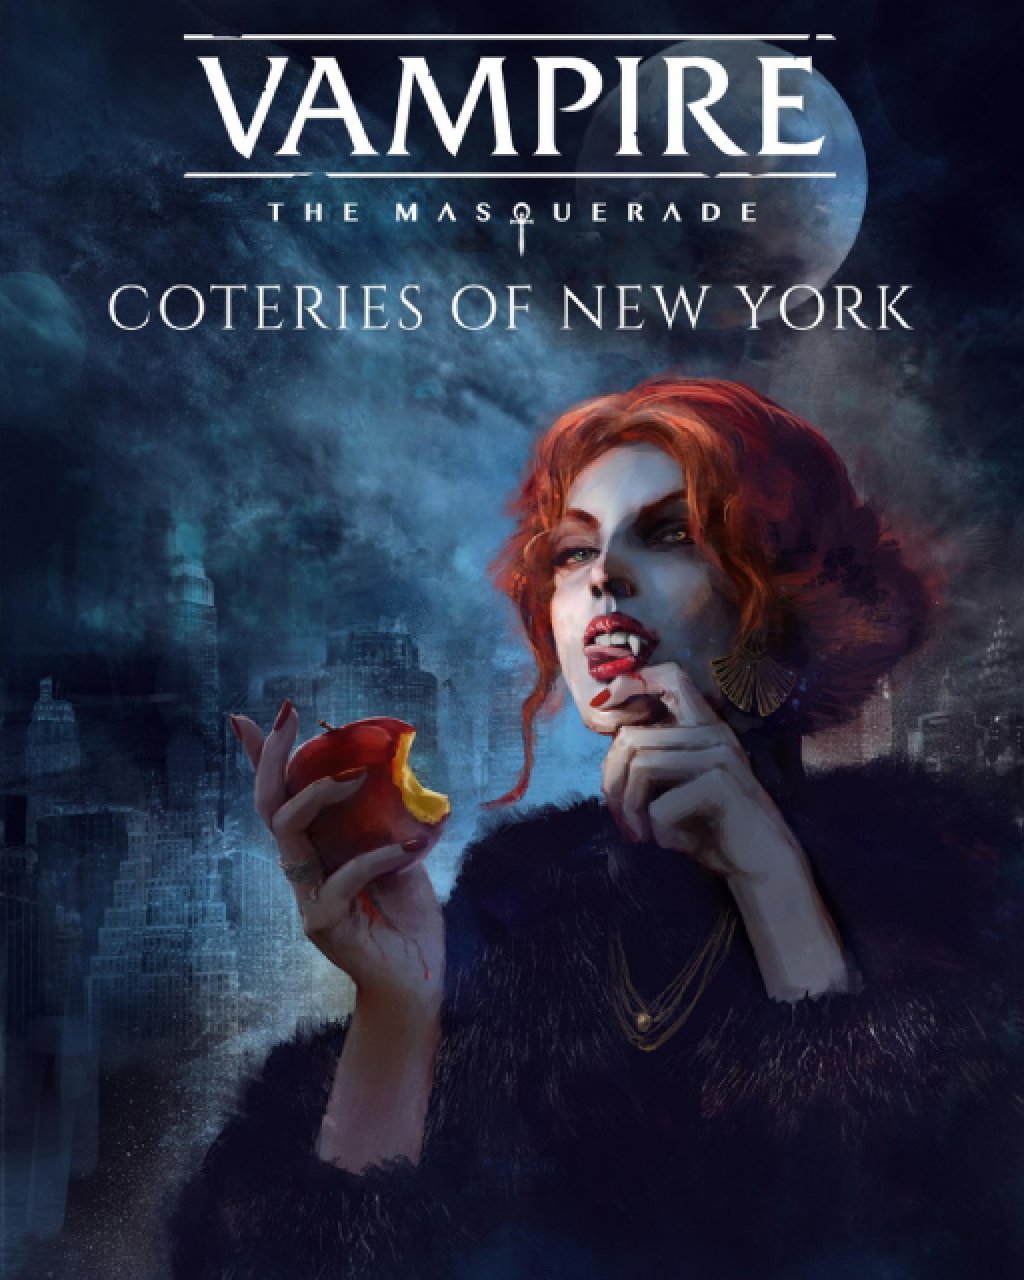 Vampire The Masquerade Coteries of New York Collector's Edition